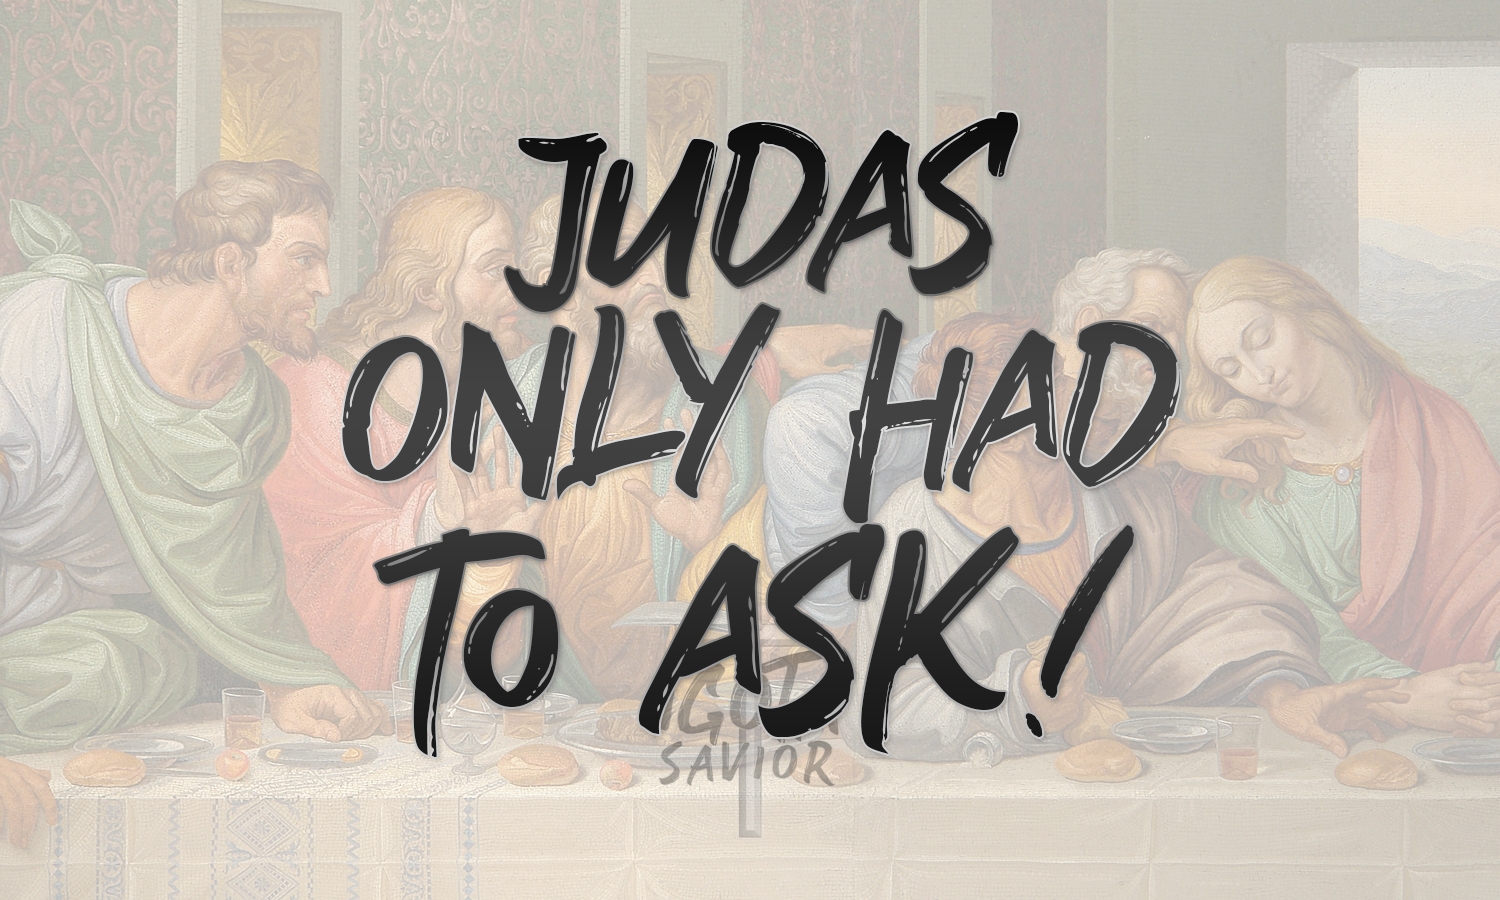 Judas Only Had To Ask!